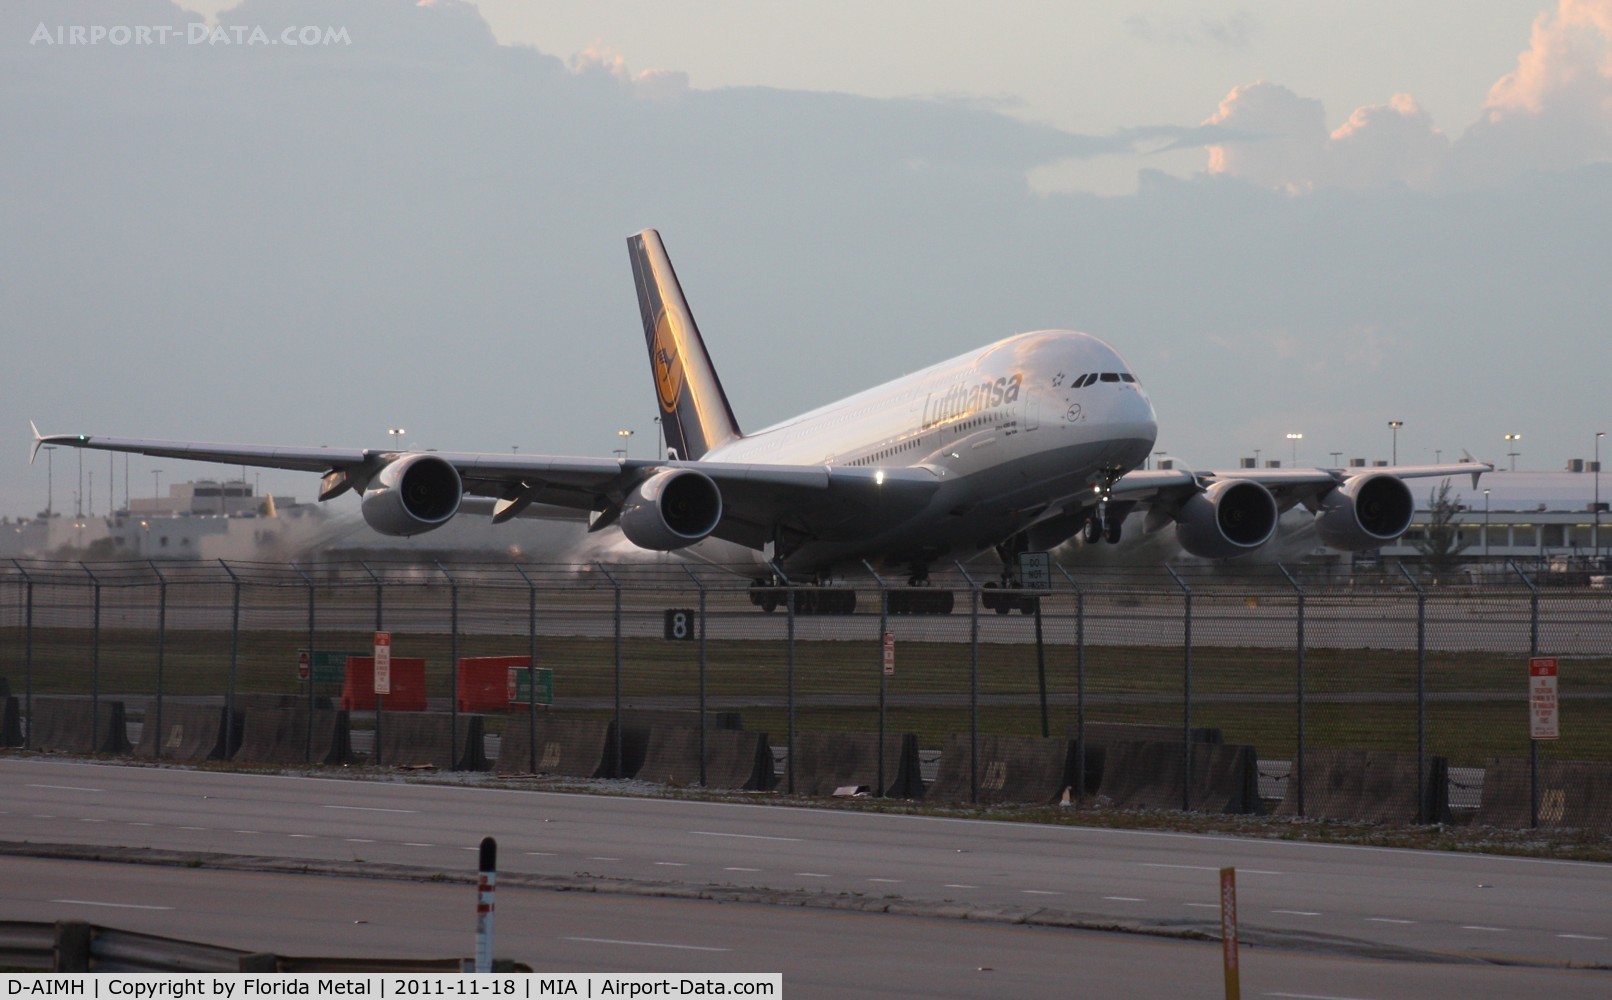 D-AIMH, 2010 Airbus A380-841 C/N 070, Lufthansa A380 taking off at dusk.  I went down to 94th Aero Squadron to get this.  I am standing on the back of my car as a cop on Perimeter Rd is signaling for me to get down.